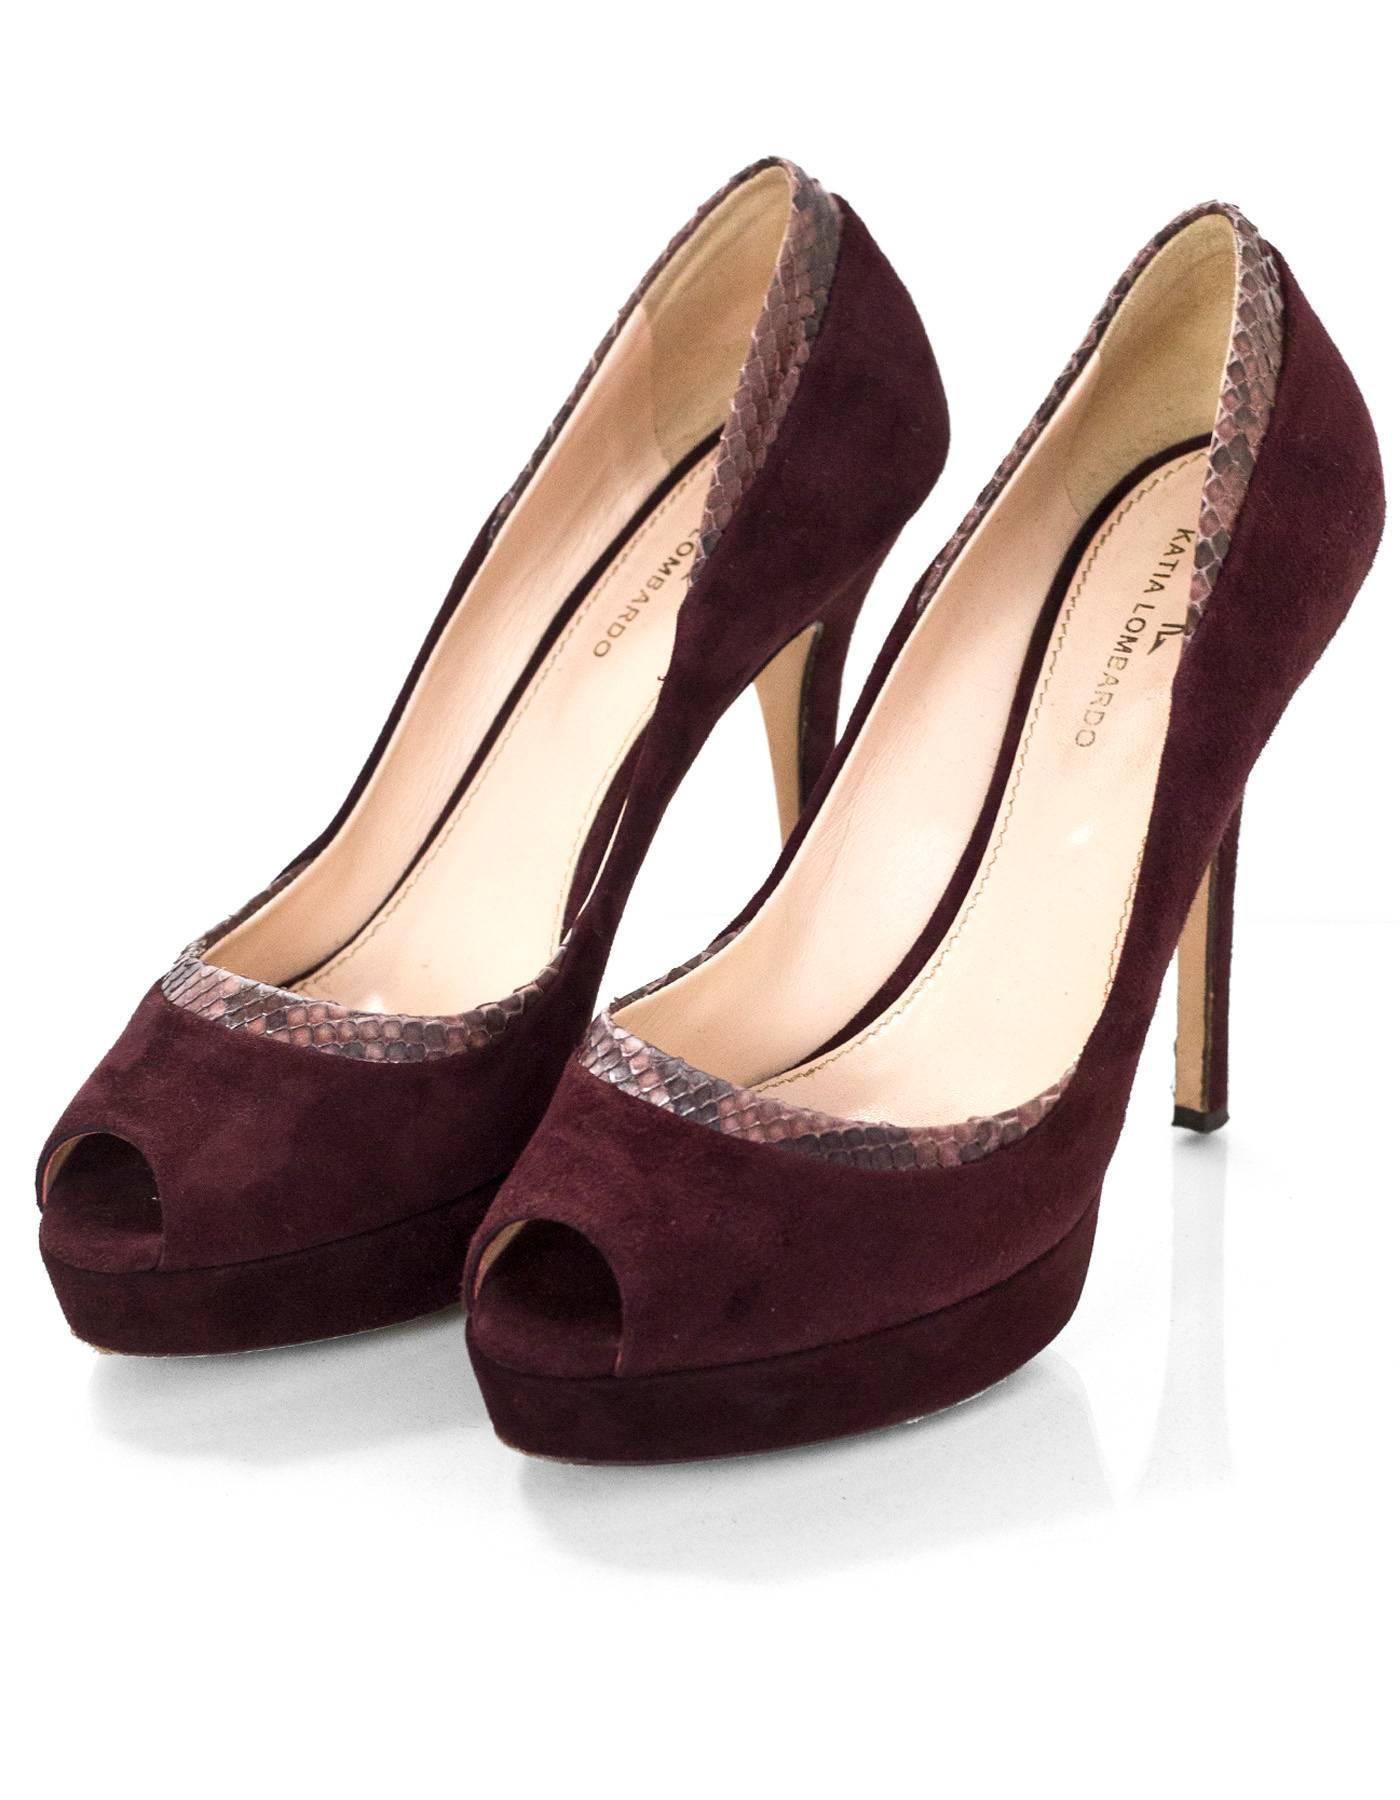 Katia Lombardo Maroon Suede & Snakeskin Pumps Sz 38

Made In: Italy
Color: Maroon
Materials: Suede, snakeskin
Closure/Opening: Slide on
Sole Stamp: Made in italy 38
Overall Condition: Excellent pre-owned condition with the exception of some wear at